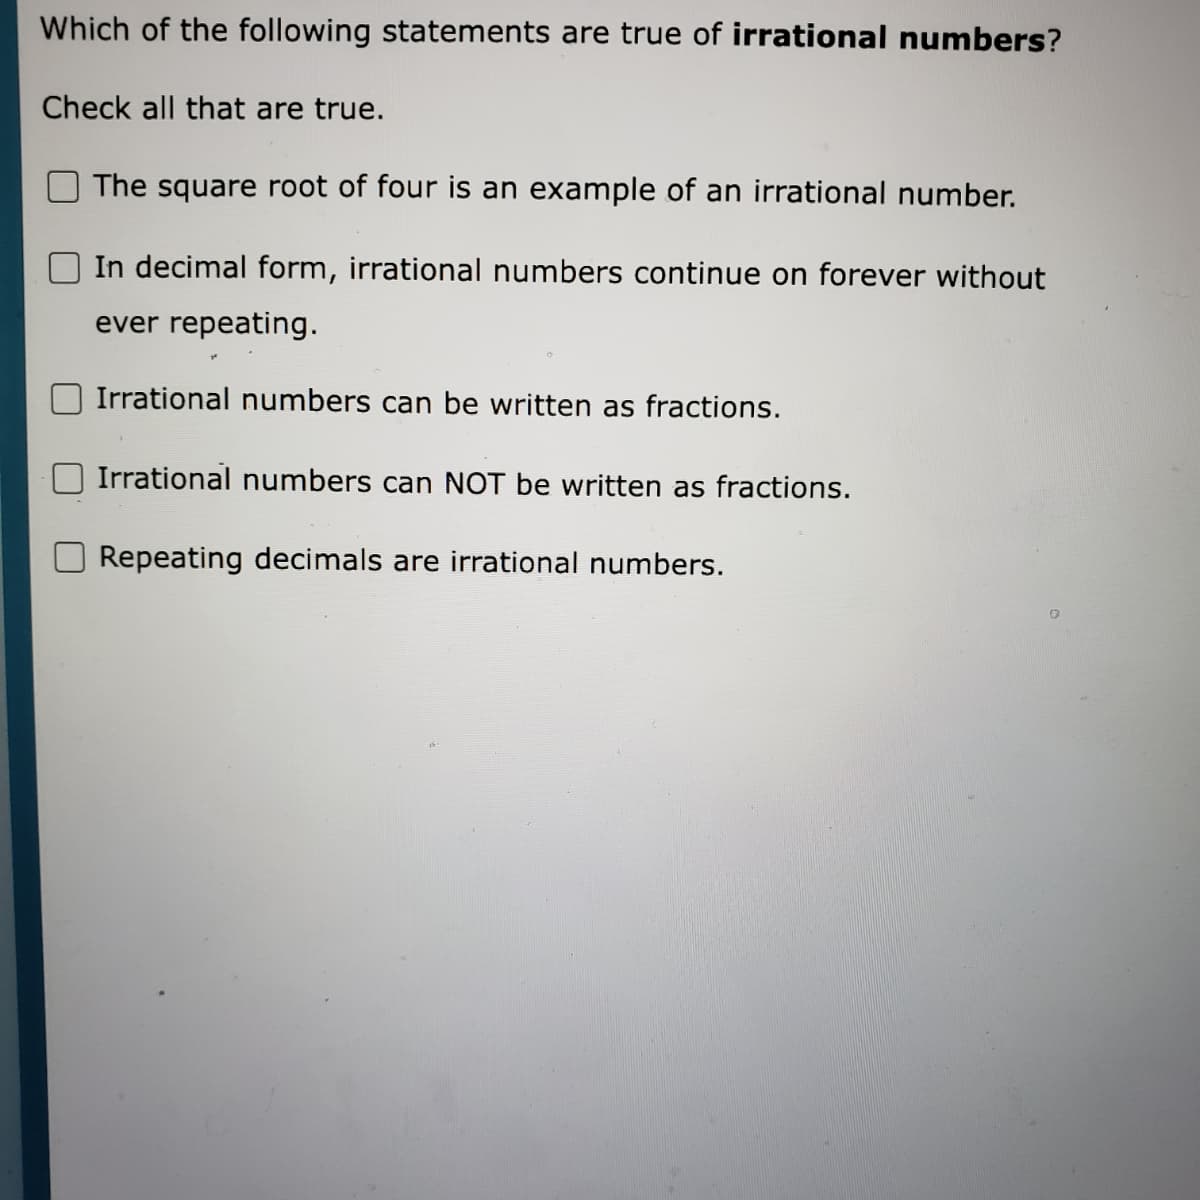 Which of the following statements are true of irrational numbers?
Check all that are true.
The square root of four is an example of an irrational number.
In decimal form, irrational numbers continue on forever without
ever repeating.
Irrational numbers can be written as fractions.
Irrational numbers can NOT be written as fractions.
Repeating decimals are irrational numbers.
